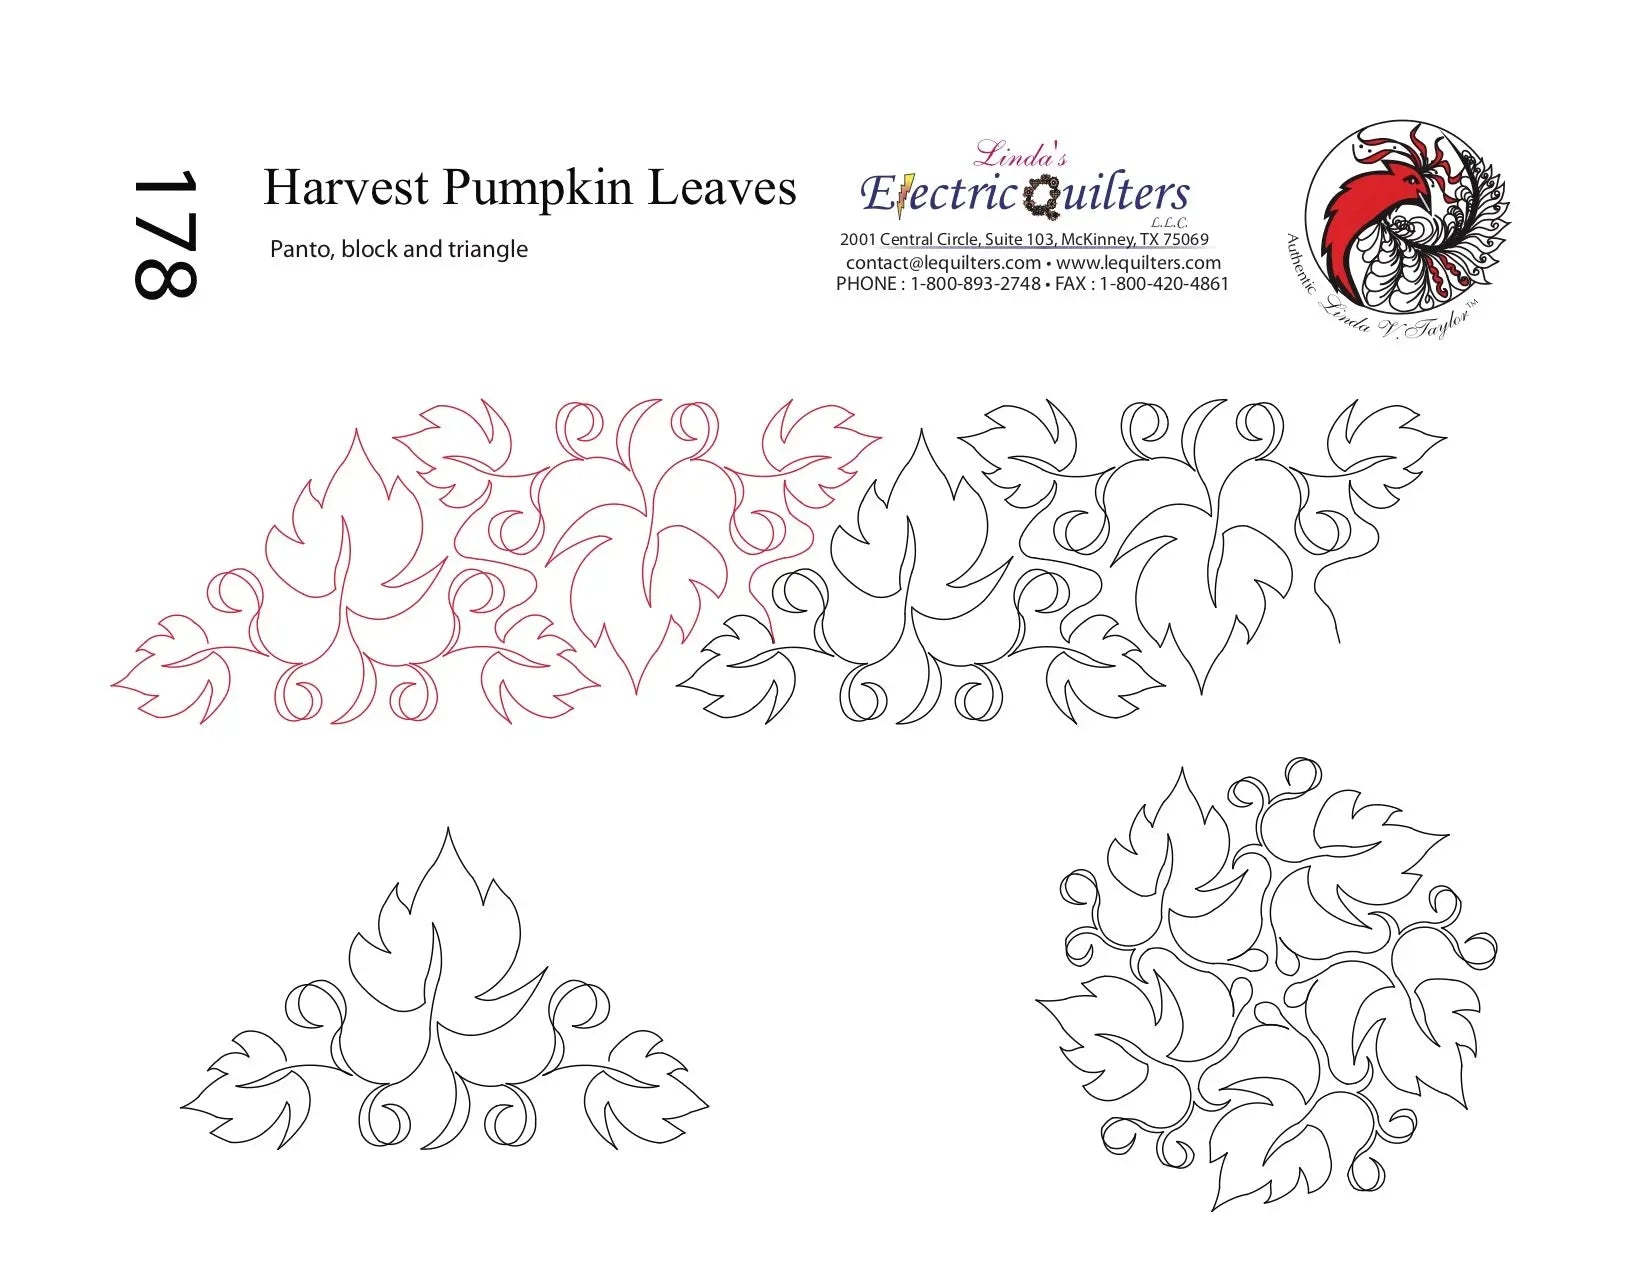 178 Harvest Pumpkin Leaves Pantograph with Blocks by Linda V. Taylor - Linda's Electric Quilters